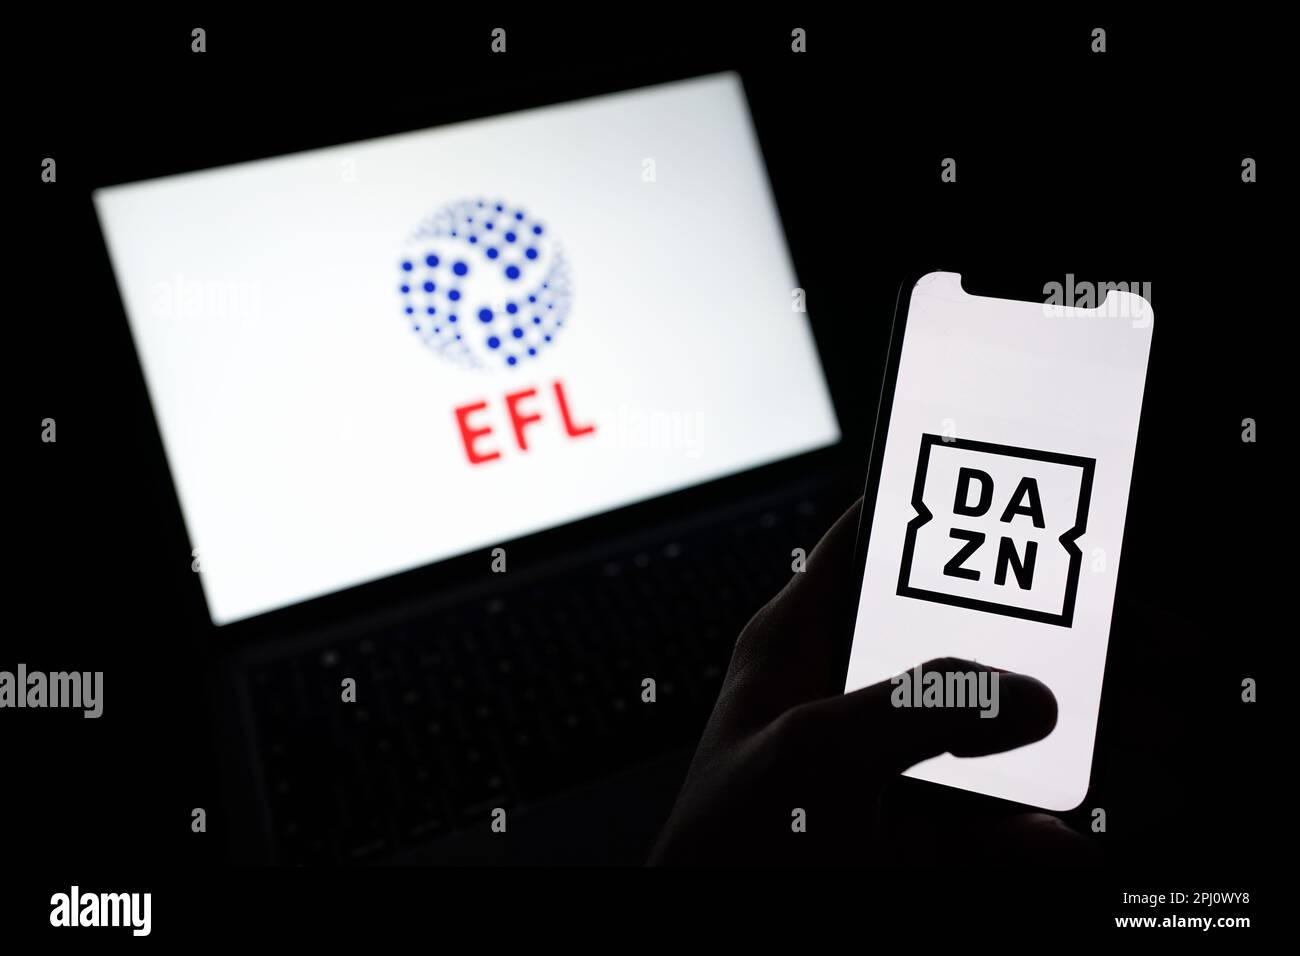 The DAZN and EFL logos can be seen on device screens